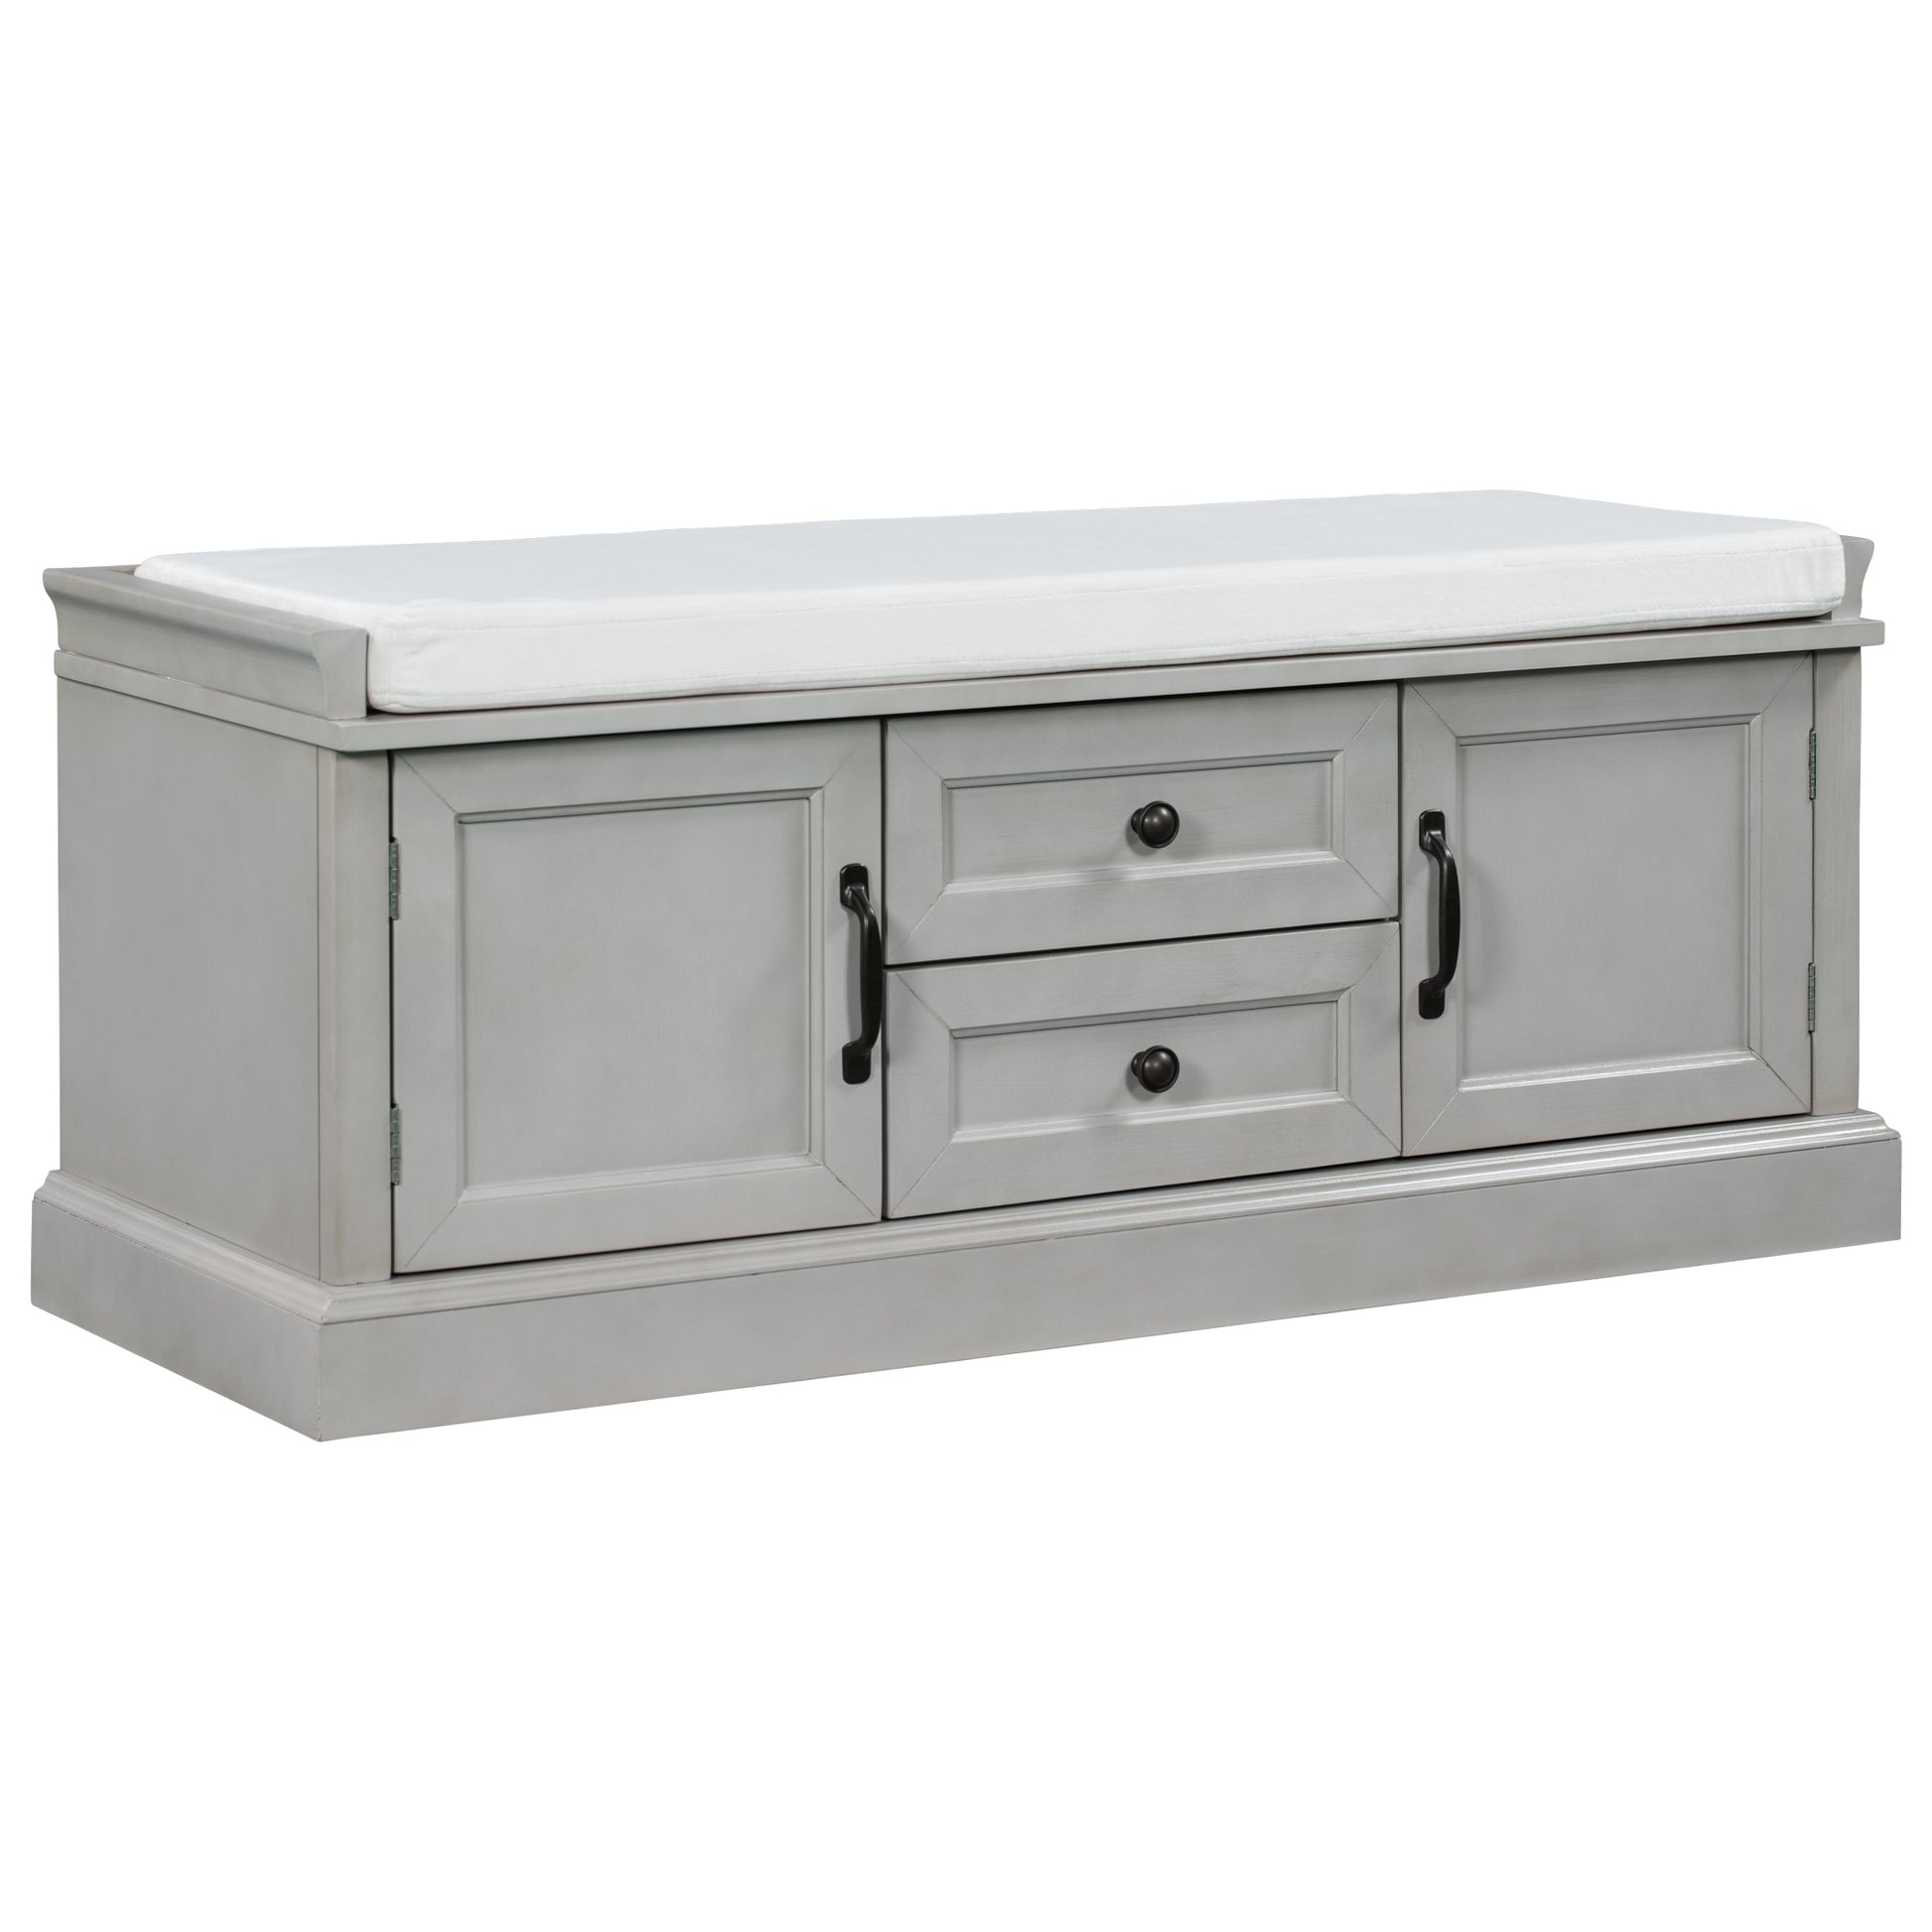 TREXM Storage Bench with 2 Drawers and 2 Cabinets - Gray Wash